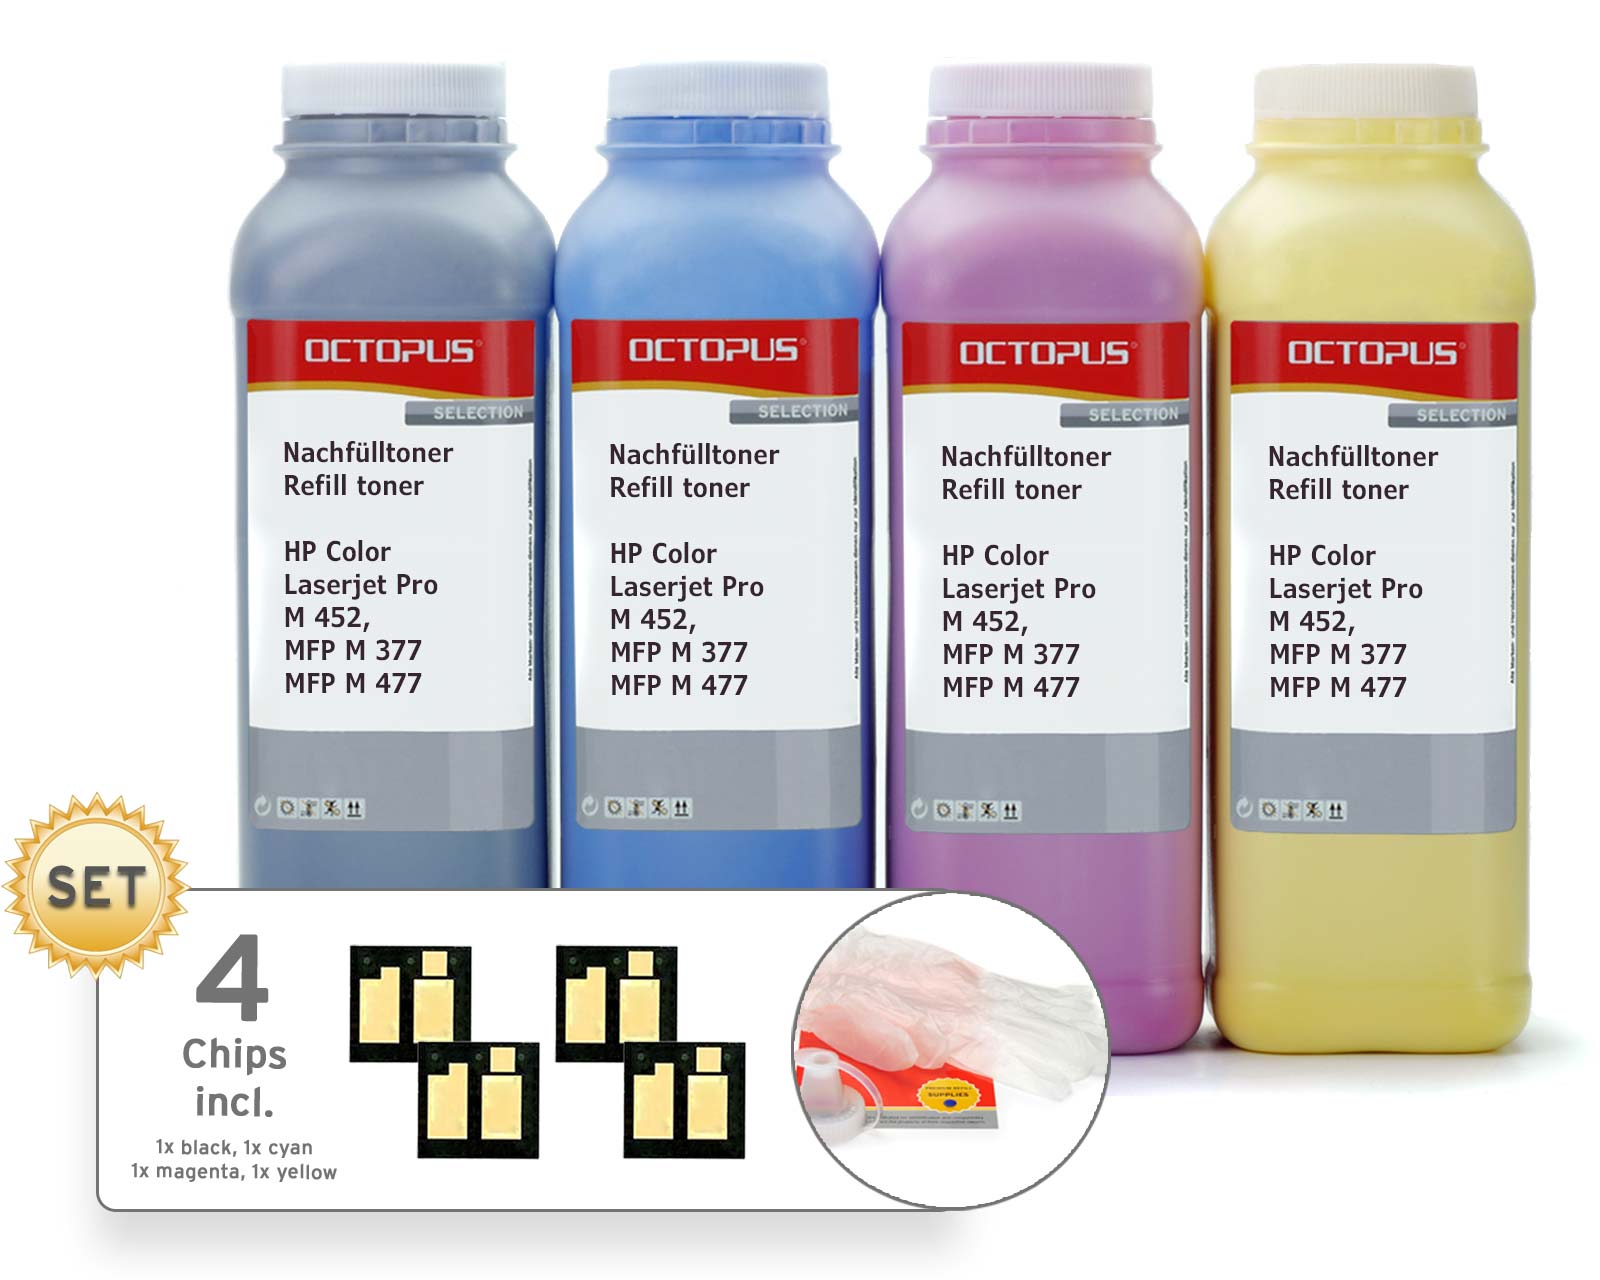 Refill toner set with chips for HP Color Laserjet Pro M 452, MFP M 377 and MFP M 477, black, cyan, magenta, yellow